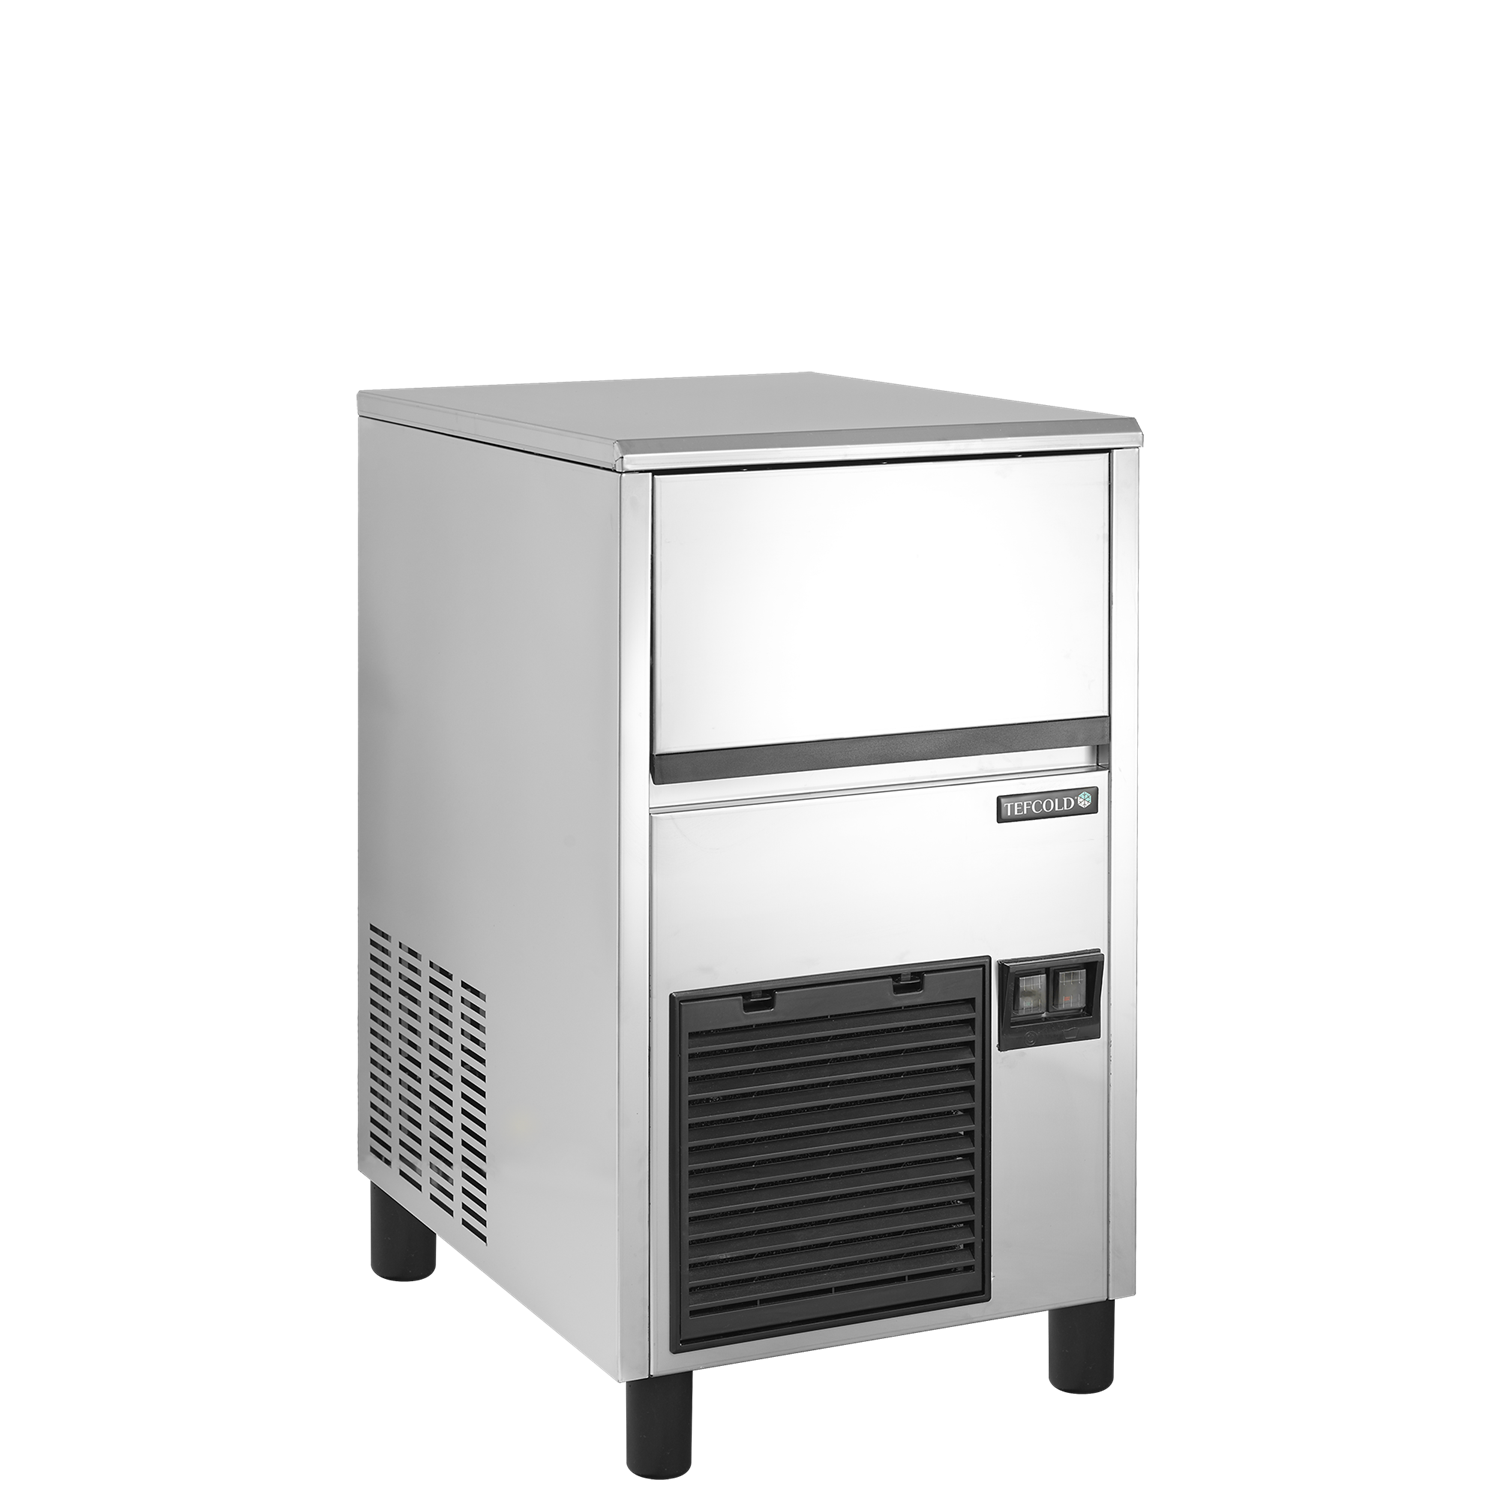 Tefcold TC26 Ice Maker.Product Ref:00552.MODEL:TC26.🚚 3-5 Days Delivery